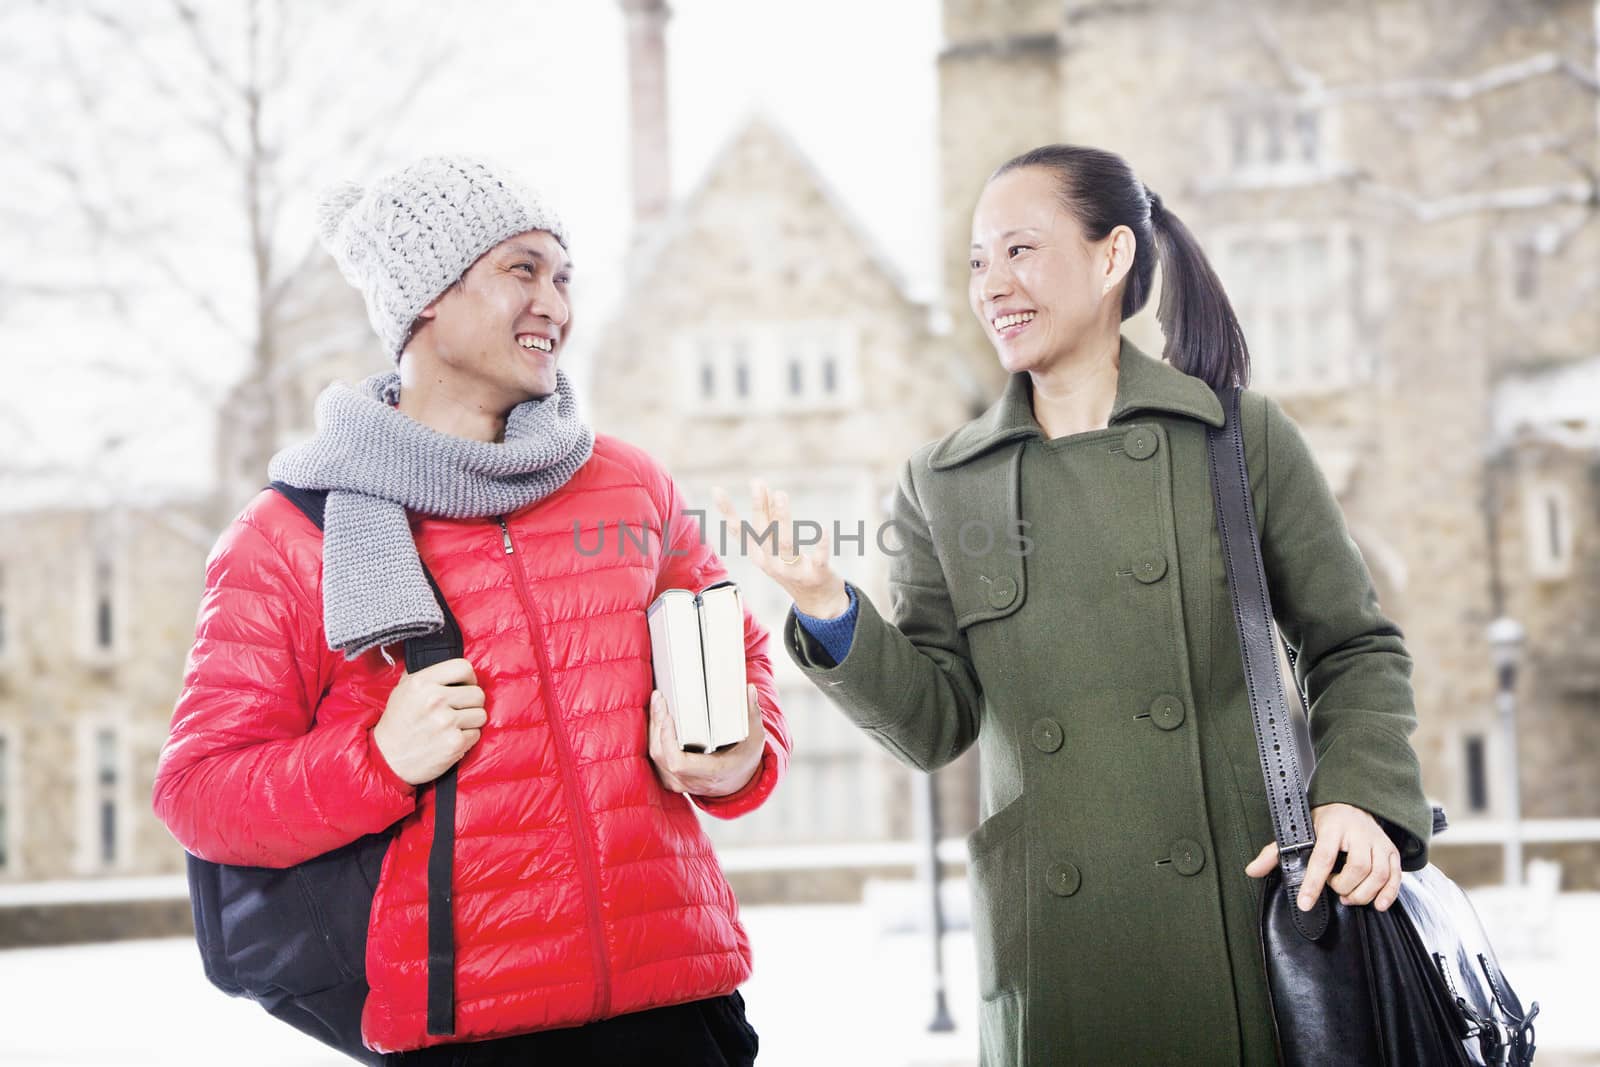 Smiling man and woman in winter clothes